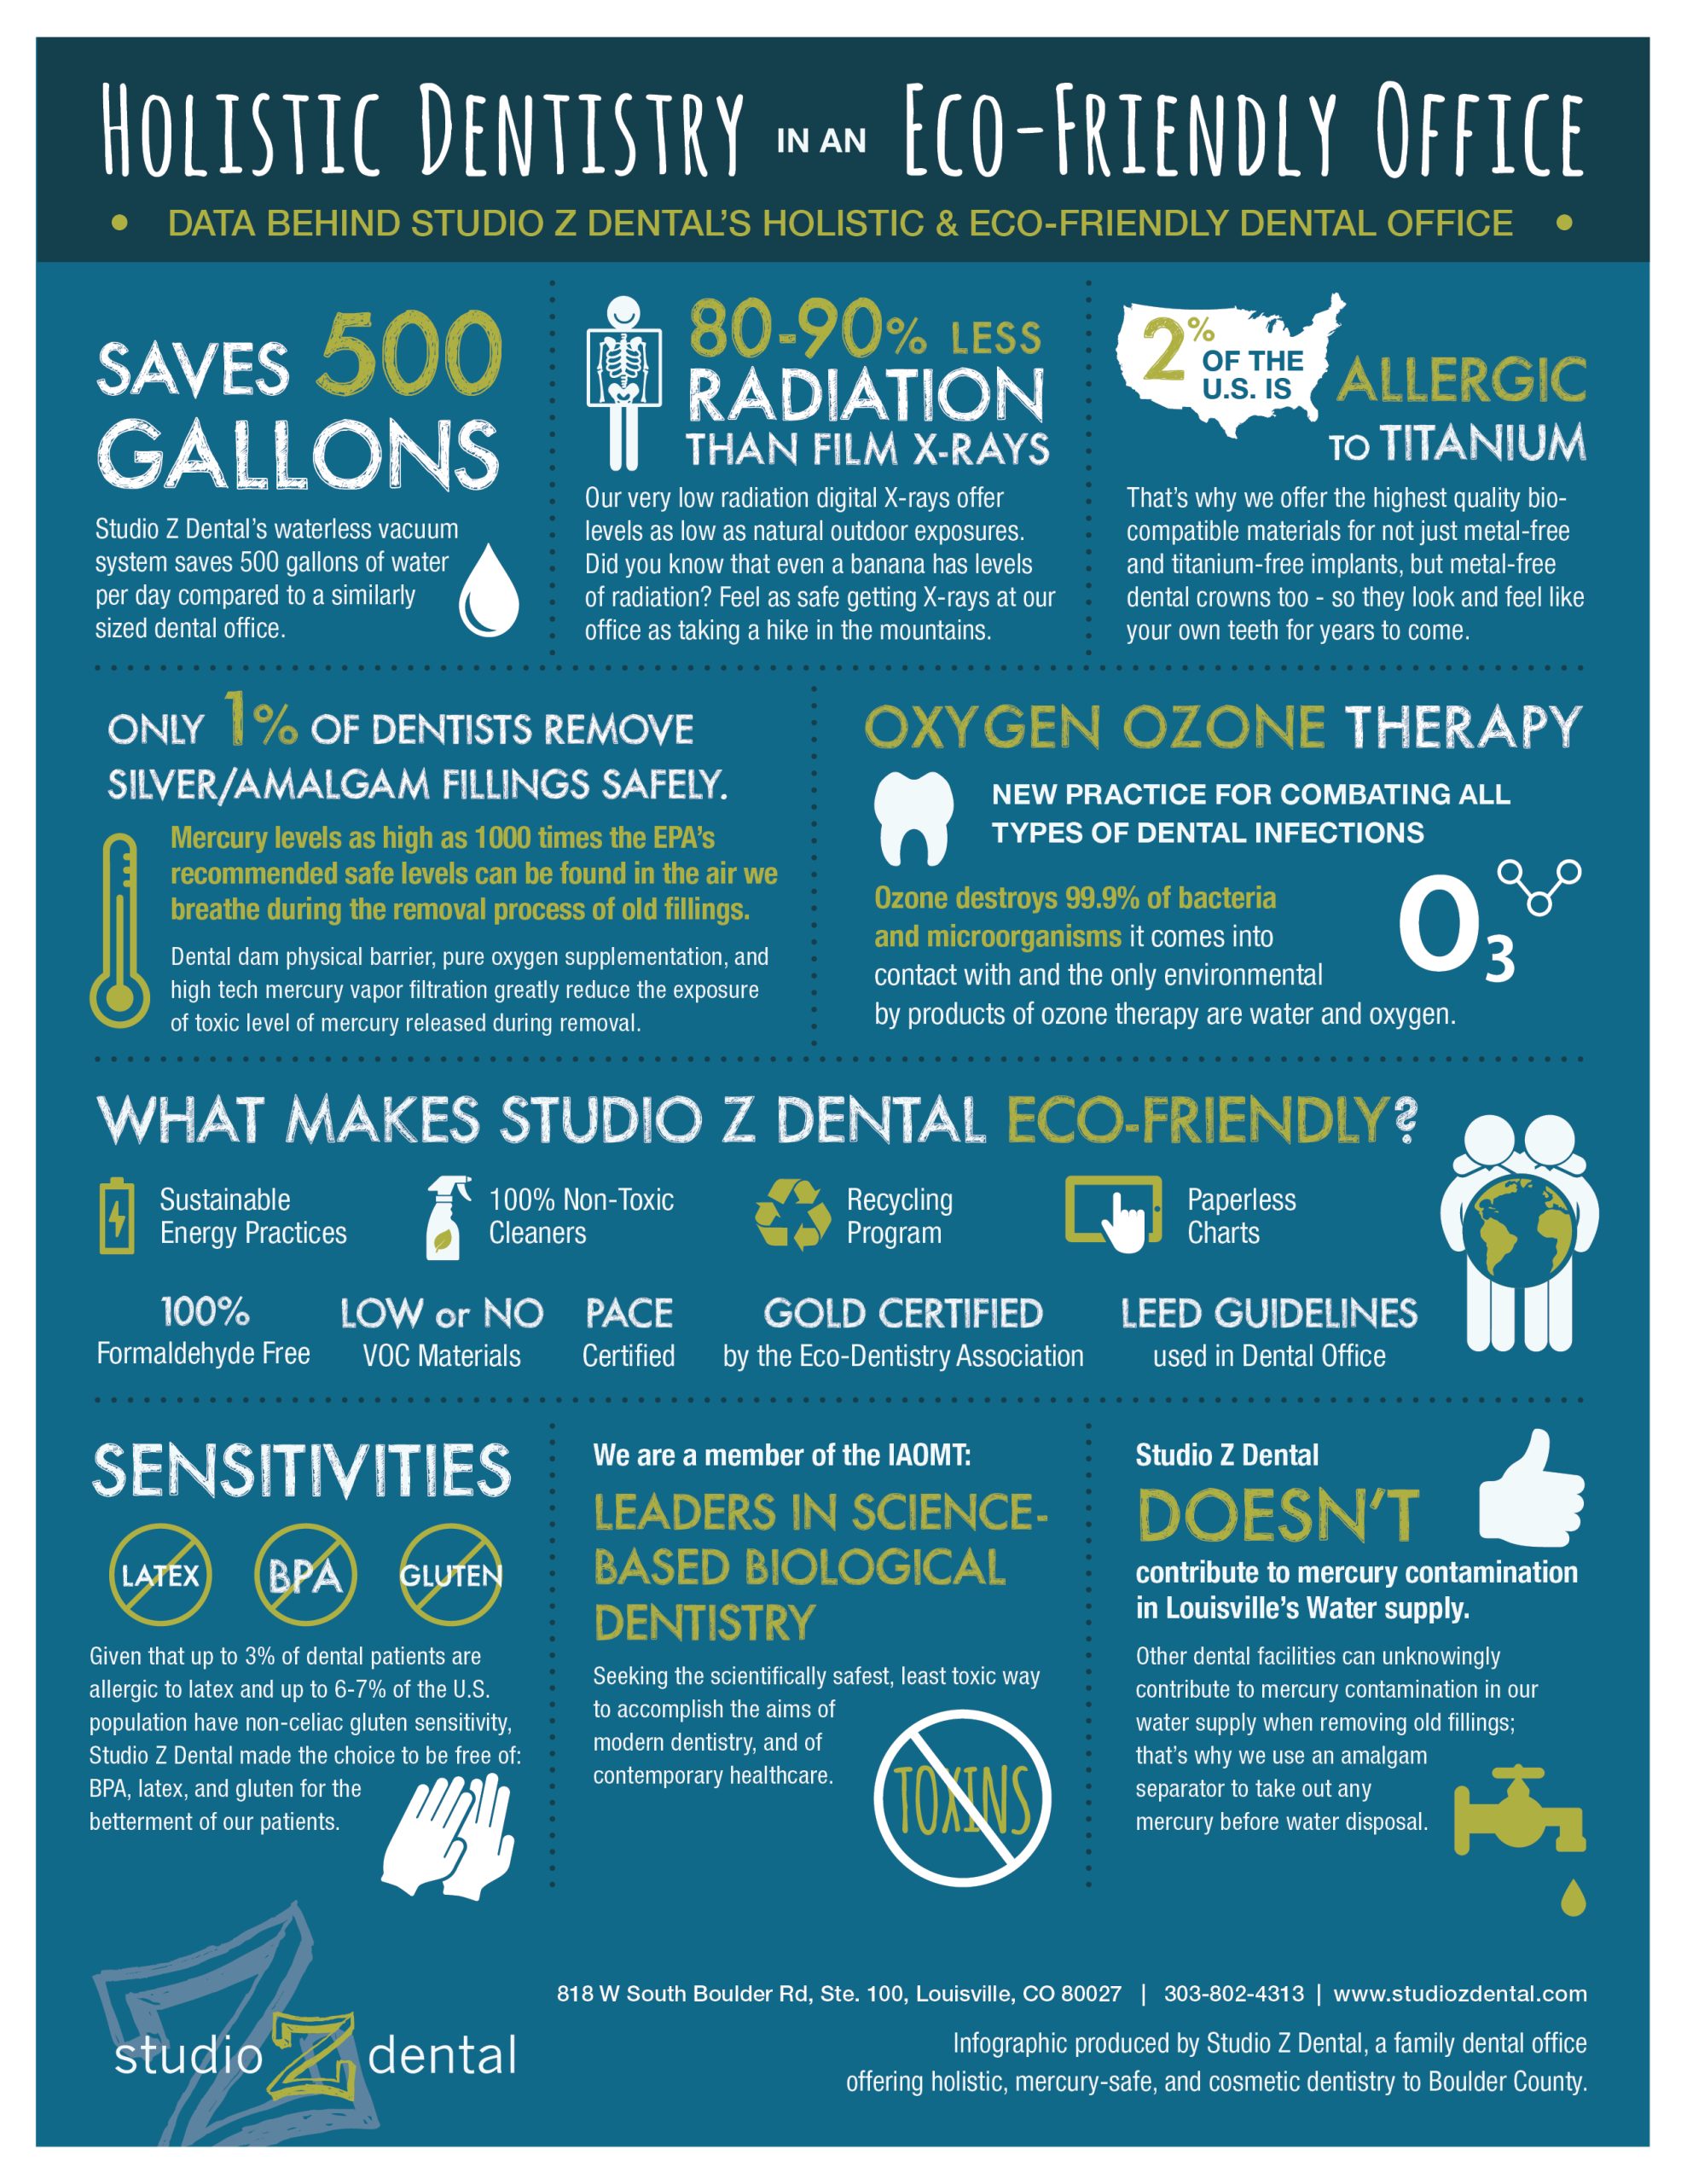 Holistic Dentistry: A Natural Approach to Oral Care